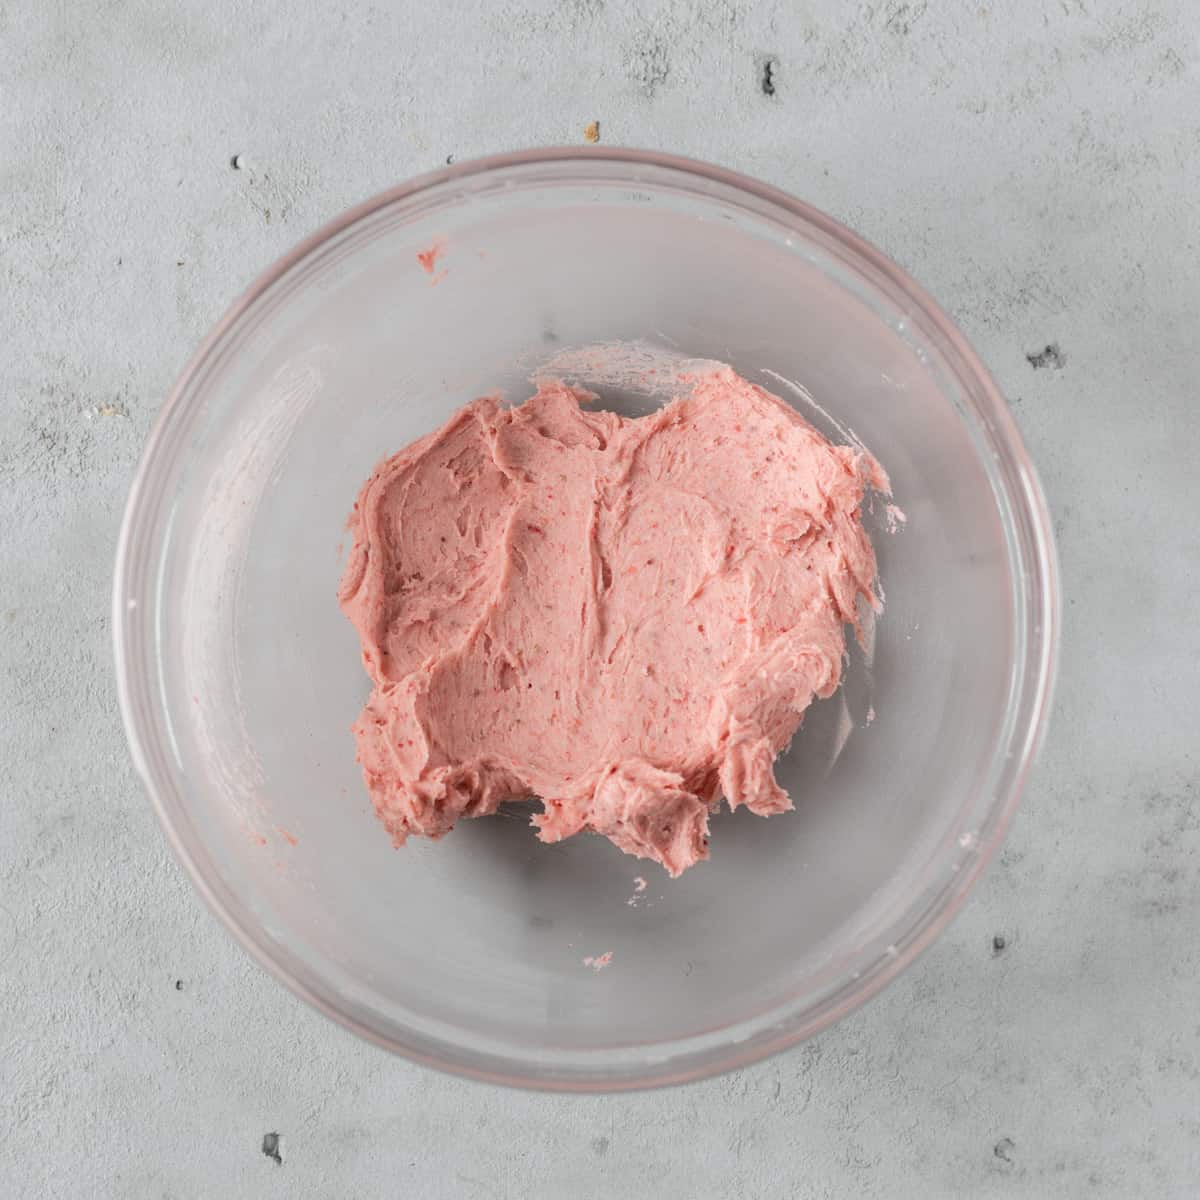 the strawberry american buttercream in a glass bowl on a grey background.